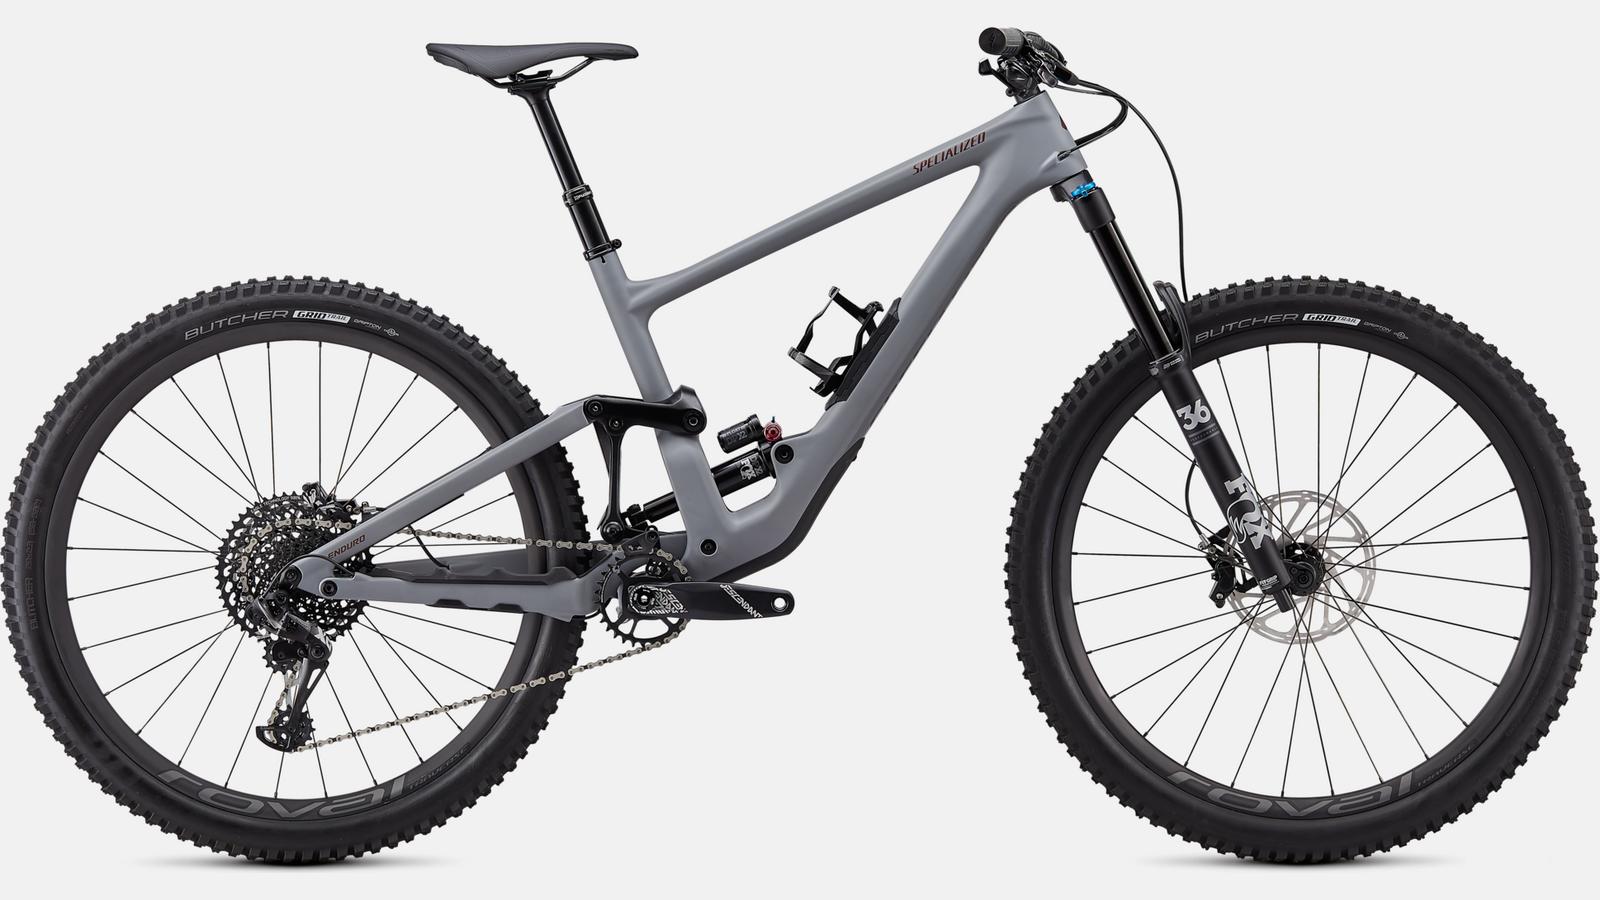 Paint for 2020 Specialized Enduro Expert - Satin Cool Grey